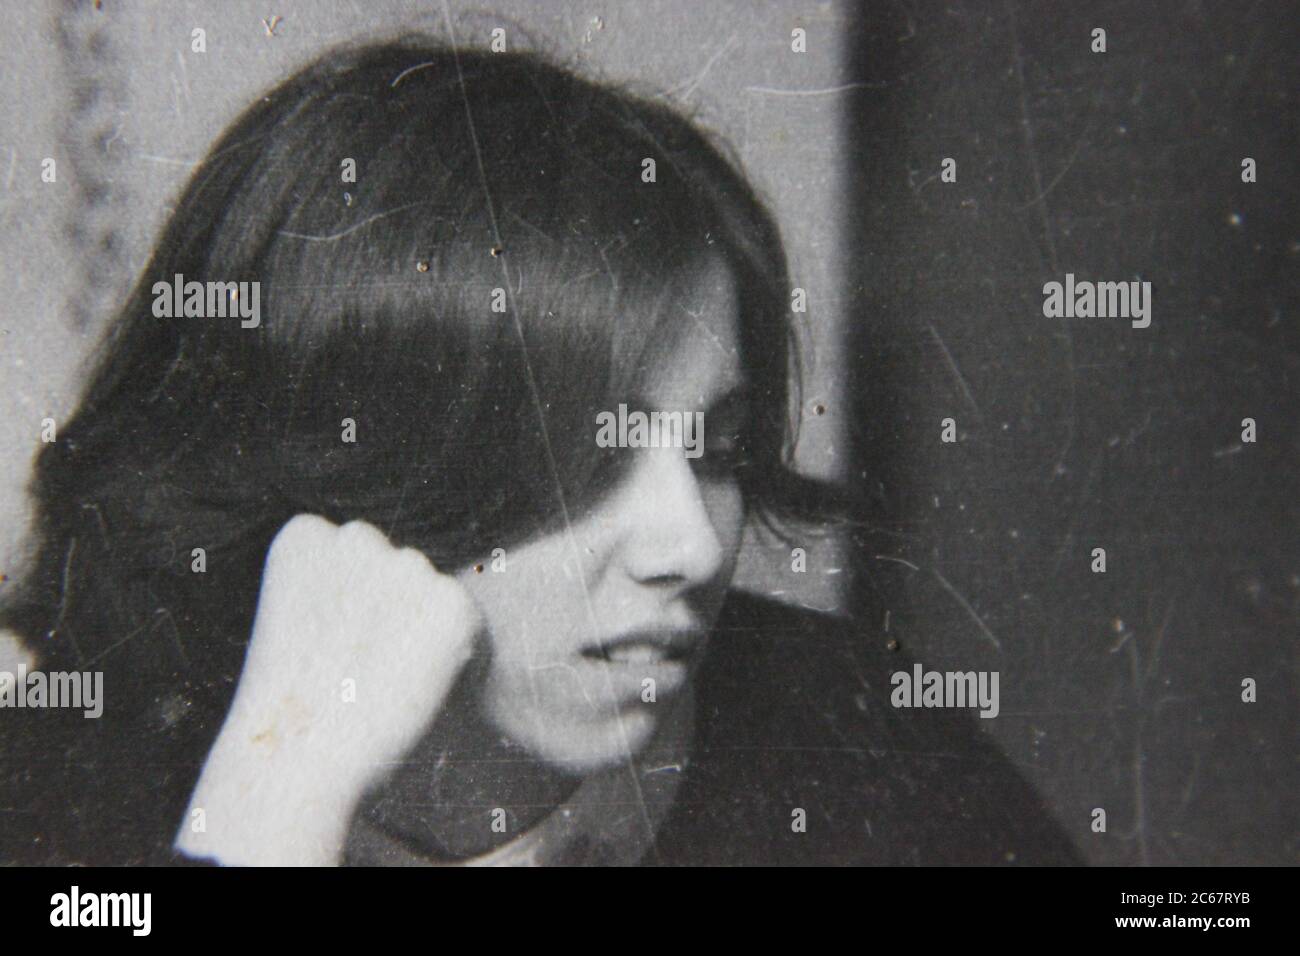 Fine 70s vintage black and white lifestyle photography of an unhappy teenager. Stock Photo